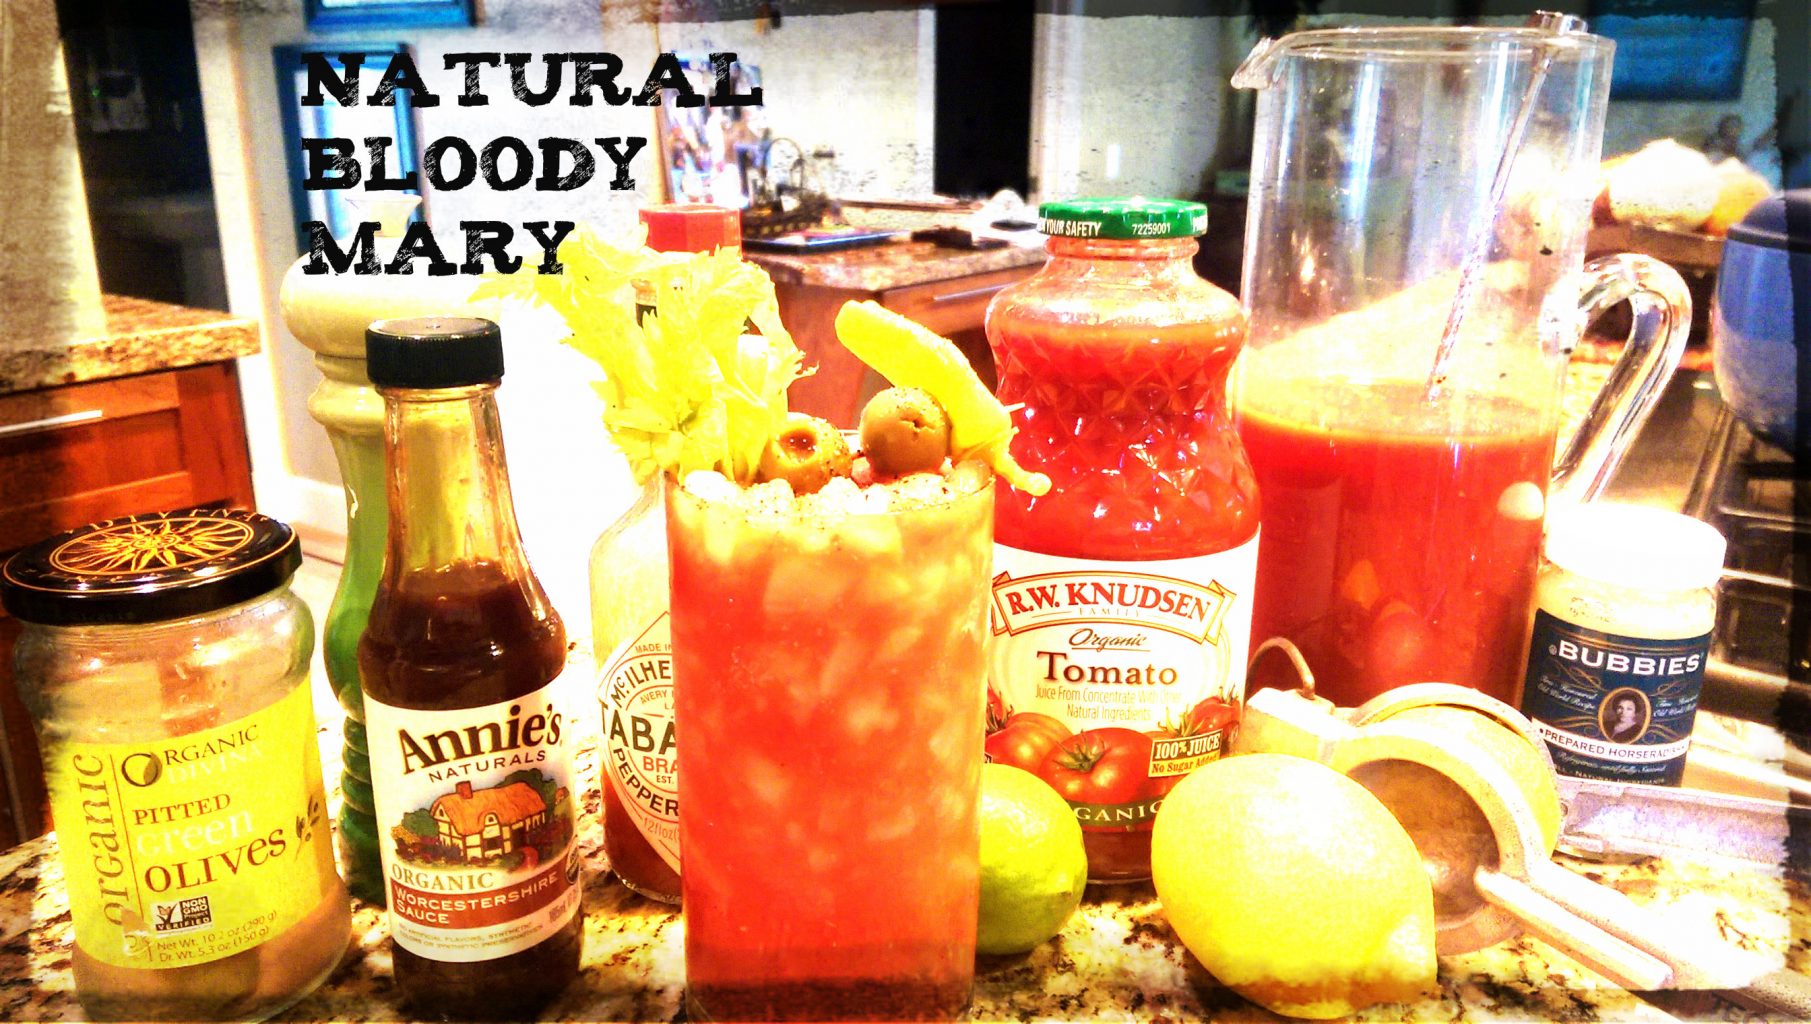 Bloody Mary natural ingred